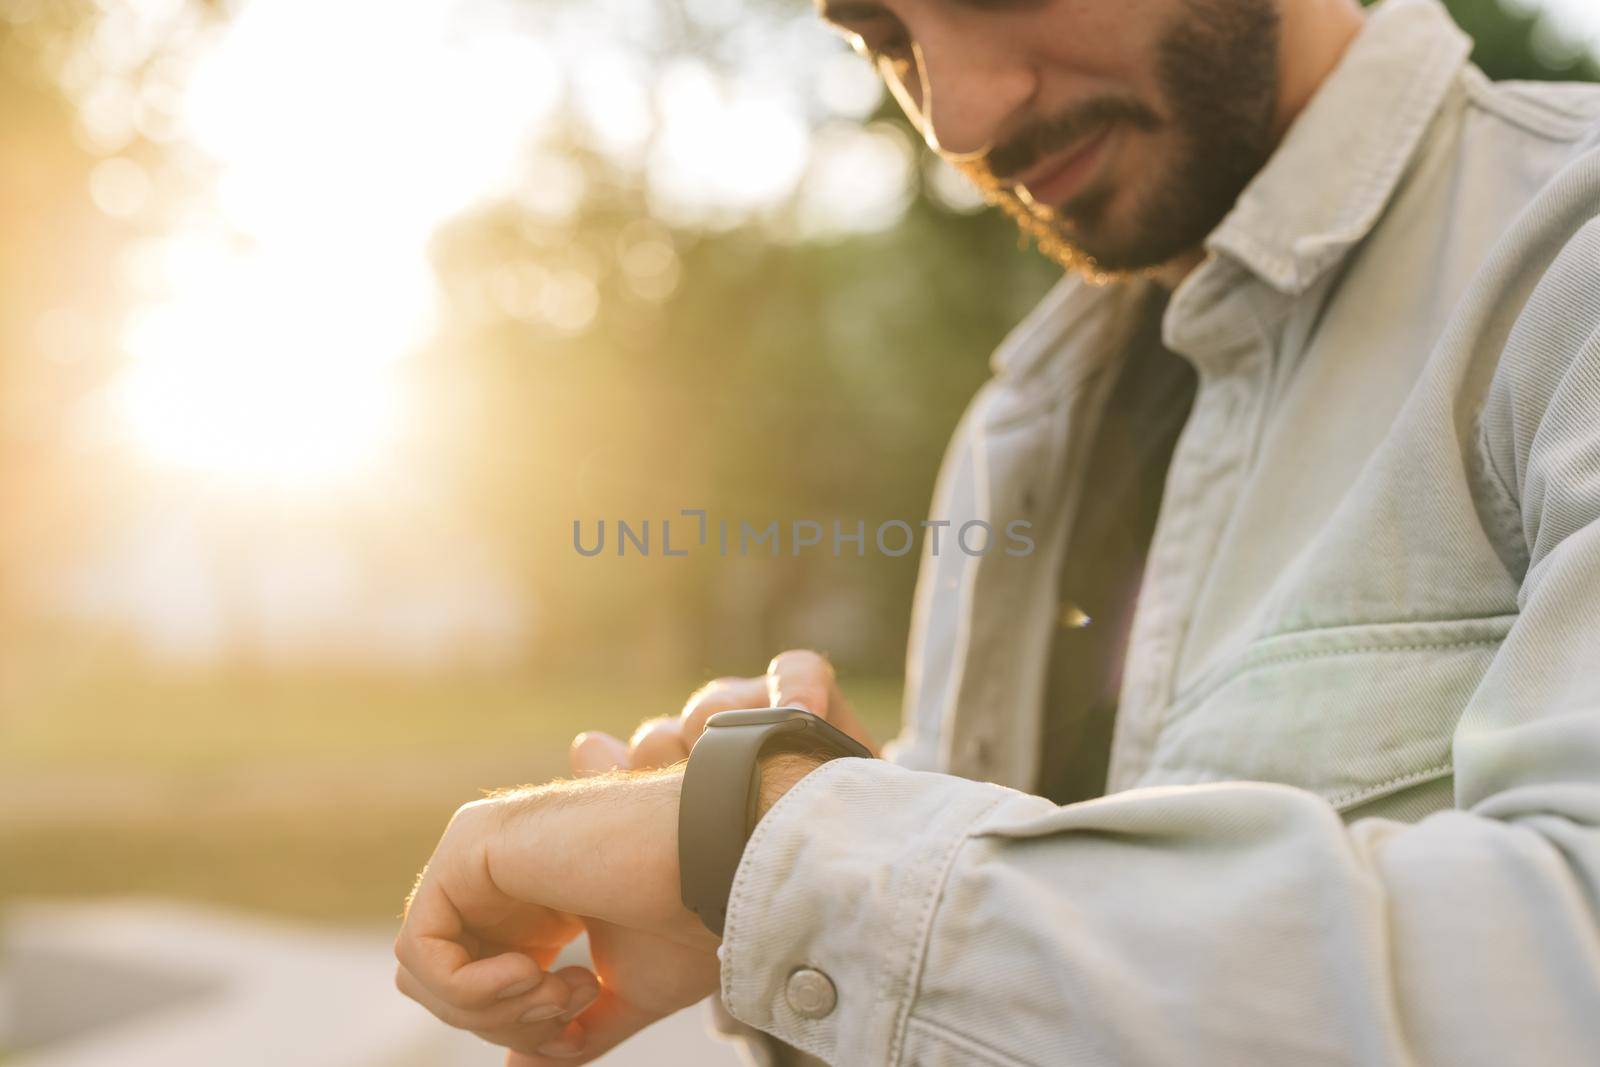 Touch Screen Wearable Technology Smart Band. Bearded Man Using Smart Watch Wearable Wristband Device. Male Checking Pulse Smartwatch App. Businessman Scrolling On Display On Smartwatch Notification.